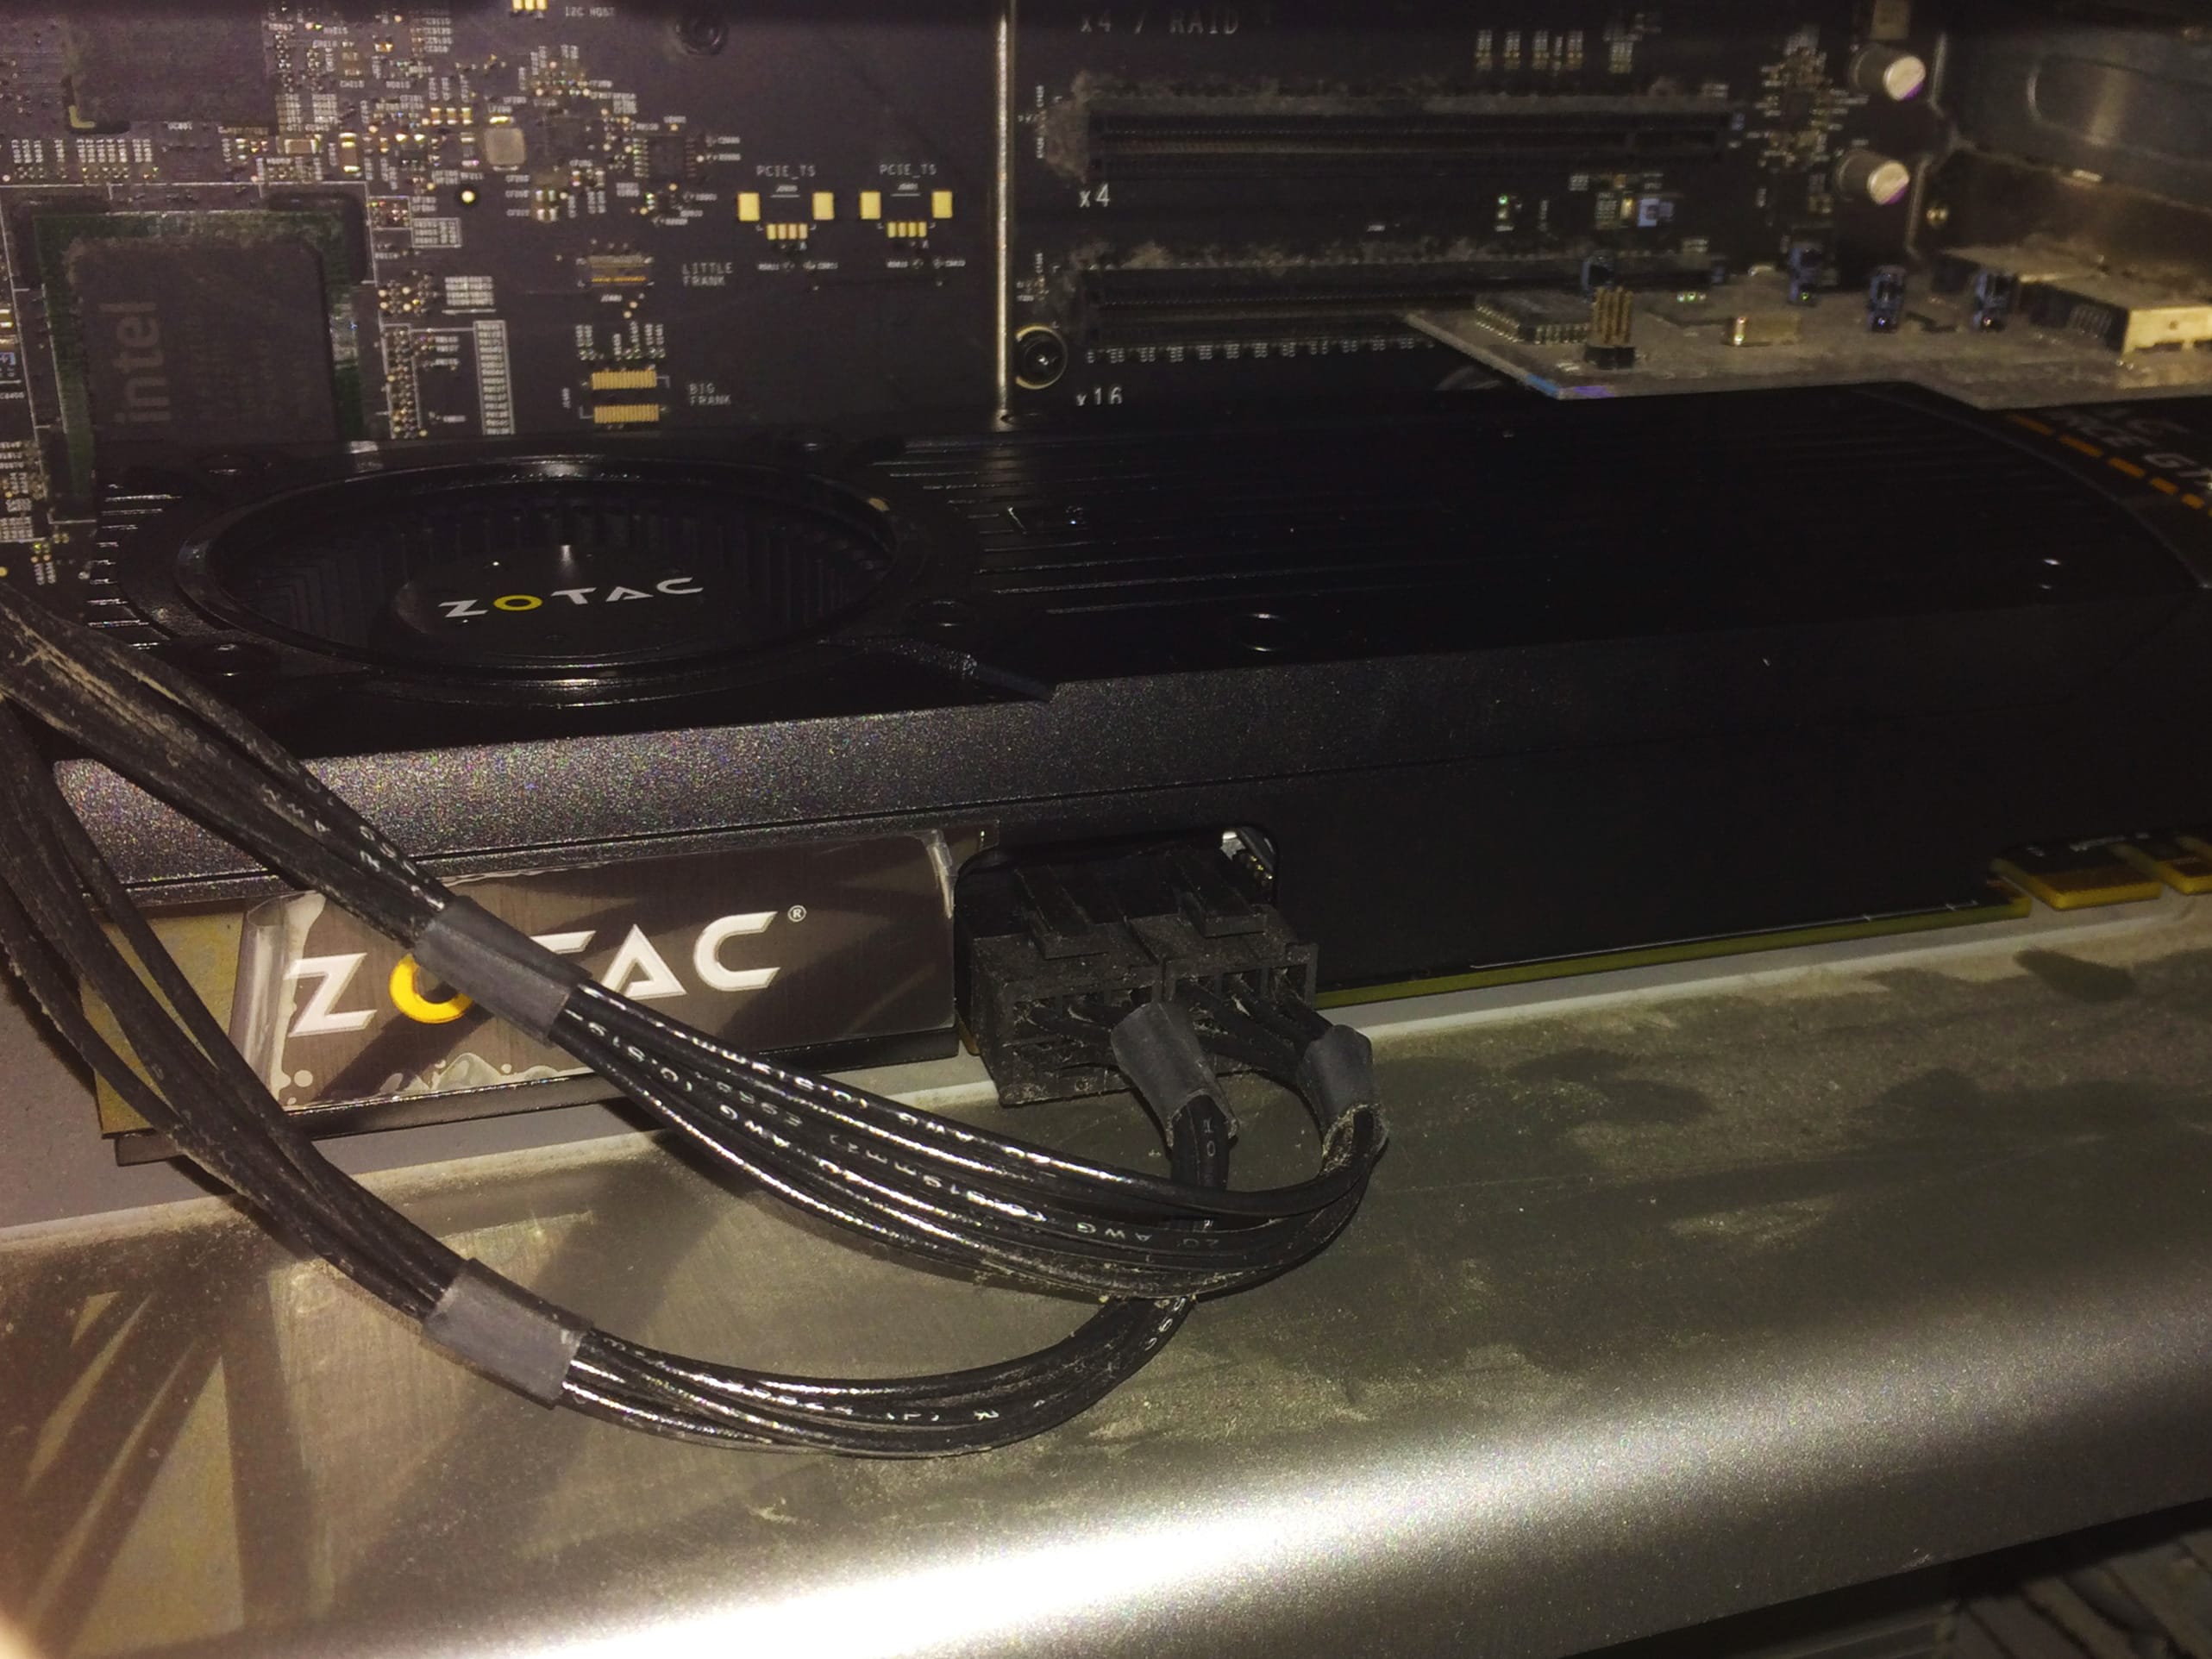 4k video card for 2010 mac pro